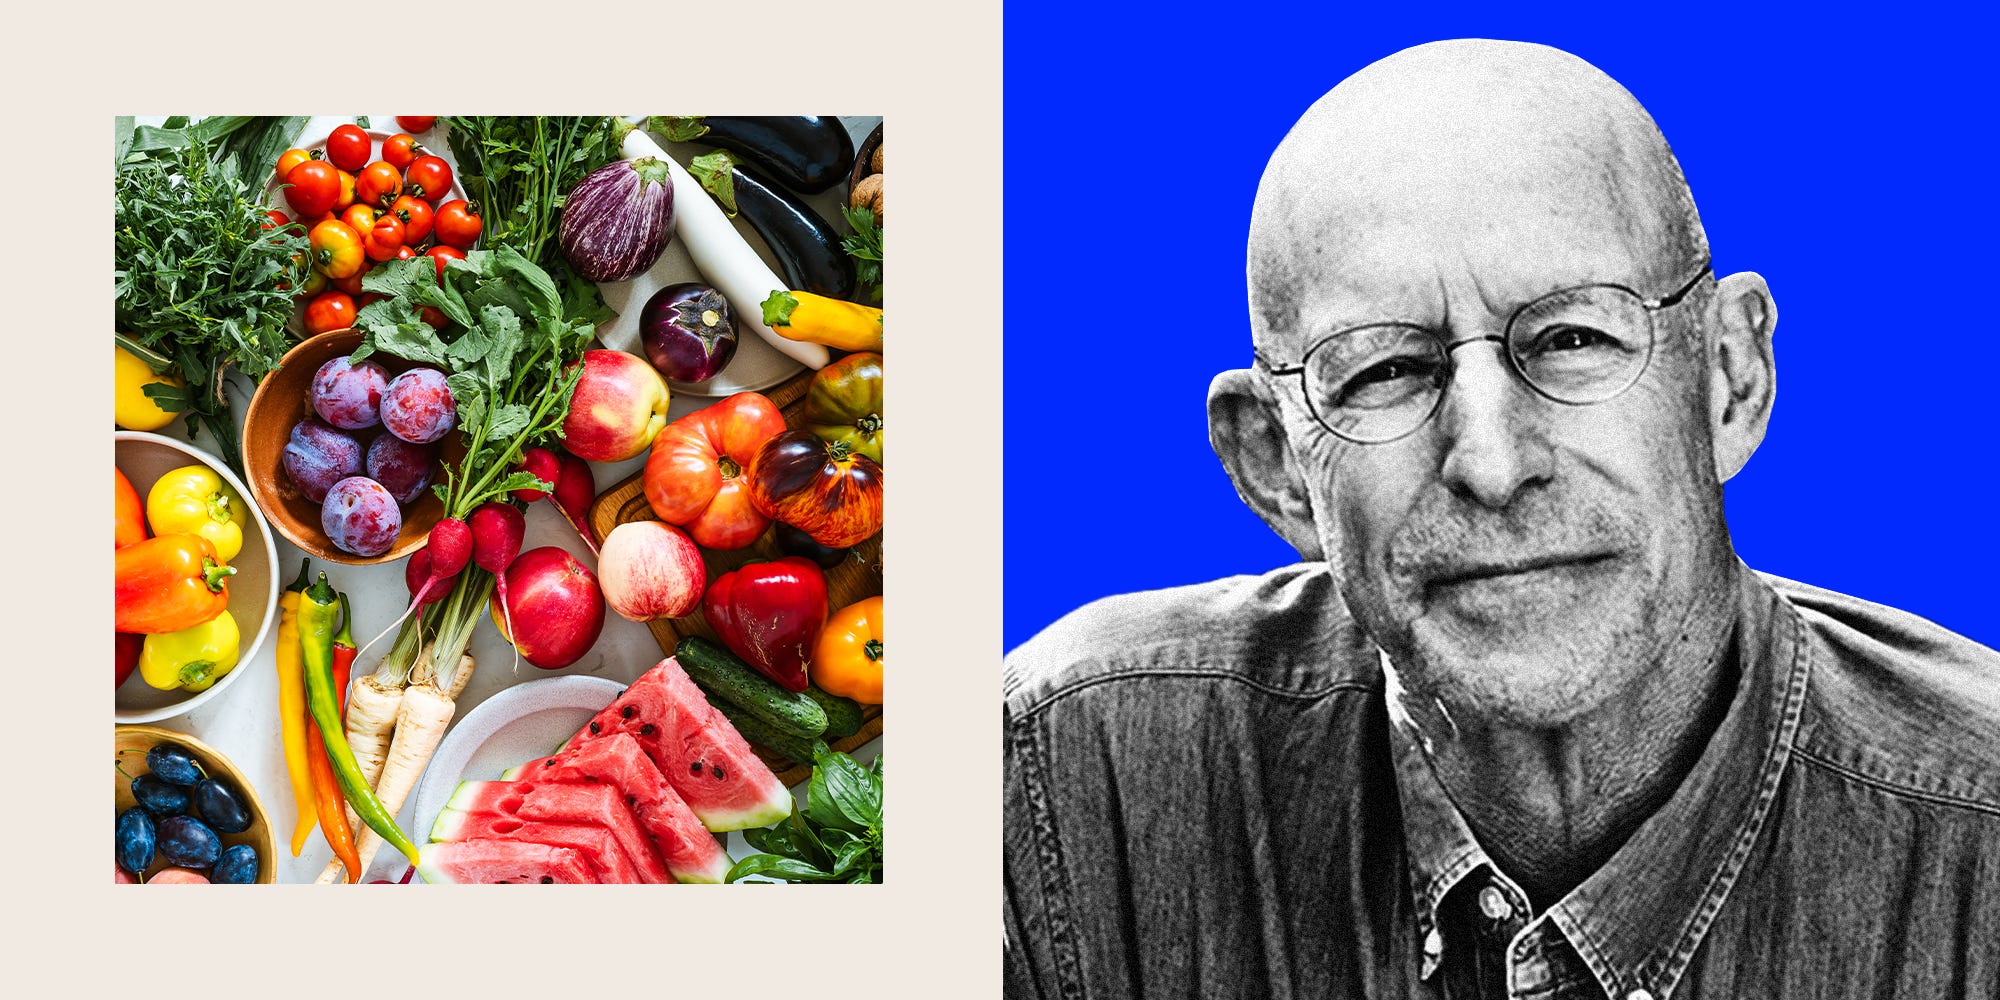 amazon, microsoft, michael pollan's deliciously simple meal plan to avoid ultra-processed foods — and where it falls short